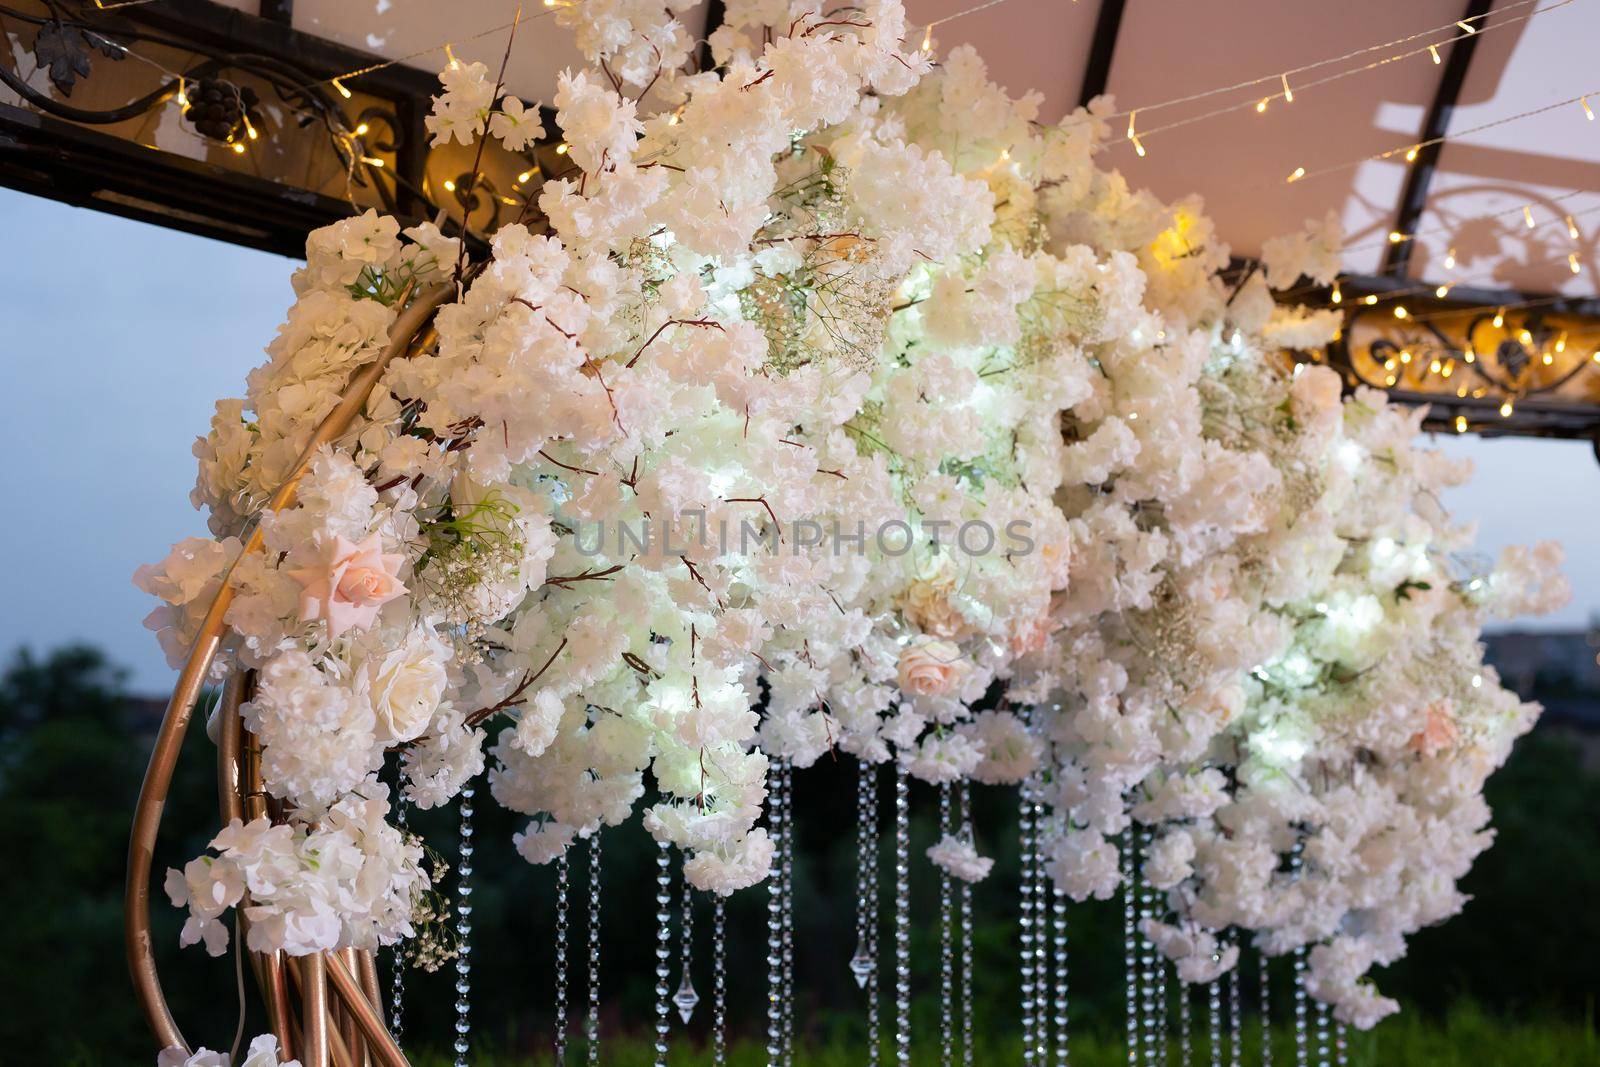 Details of the wedding ceremony made of fresh flowers, sparkling beads. Delicate and beautiful wedding decor for newlyweds.